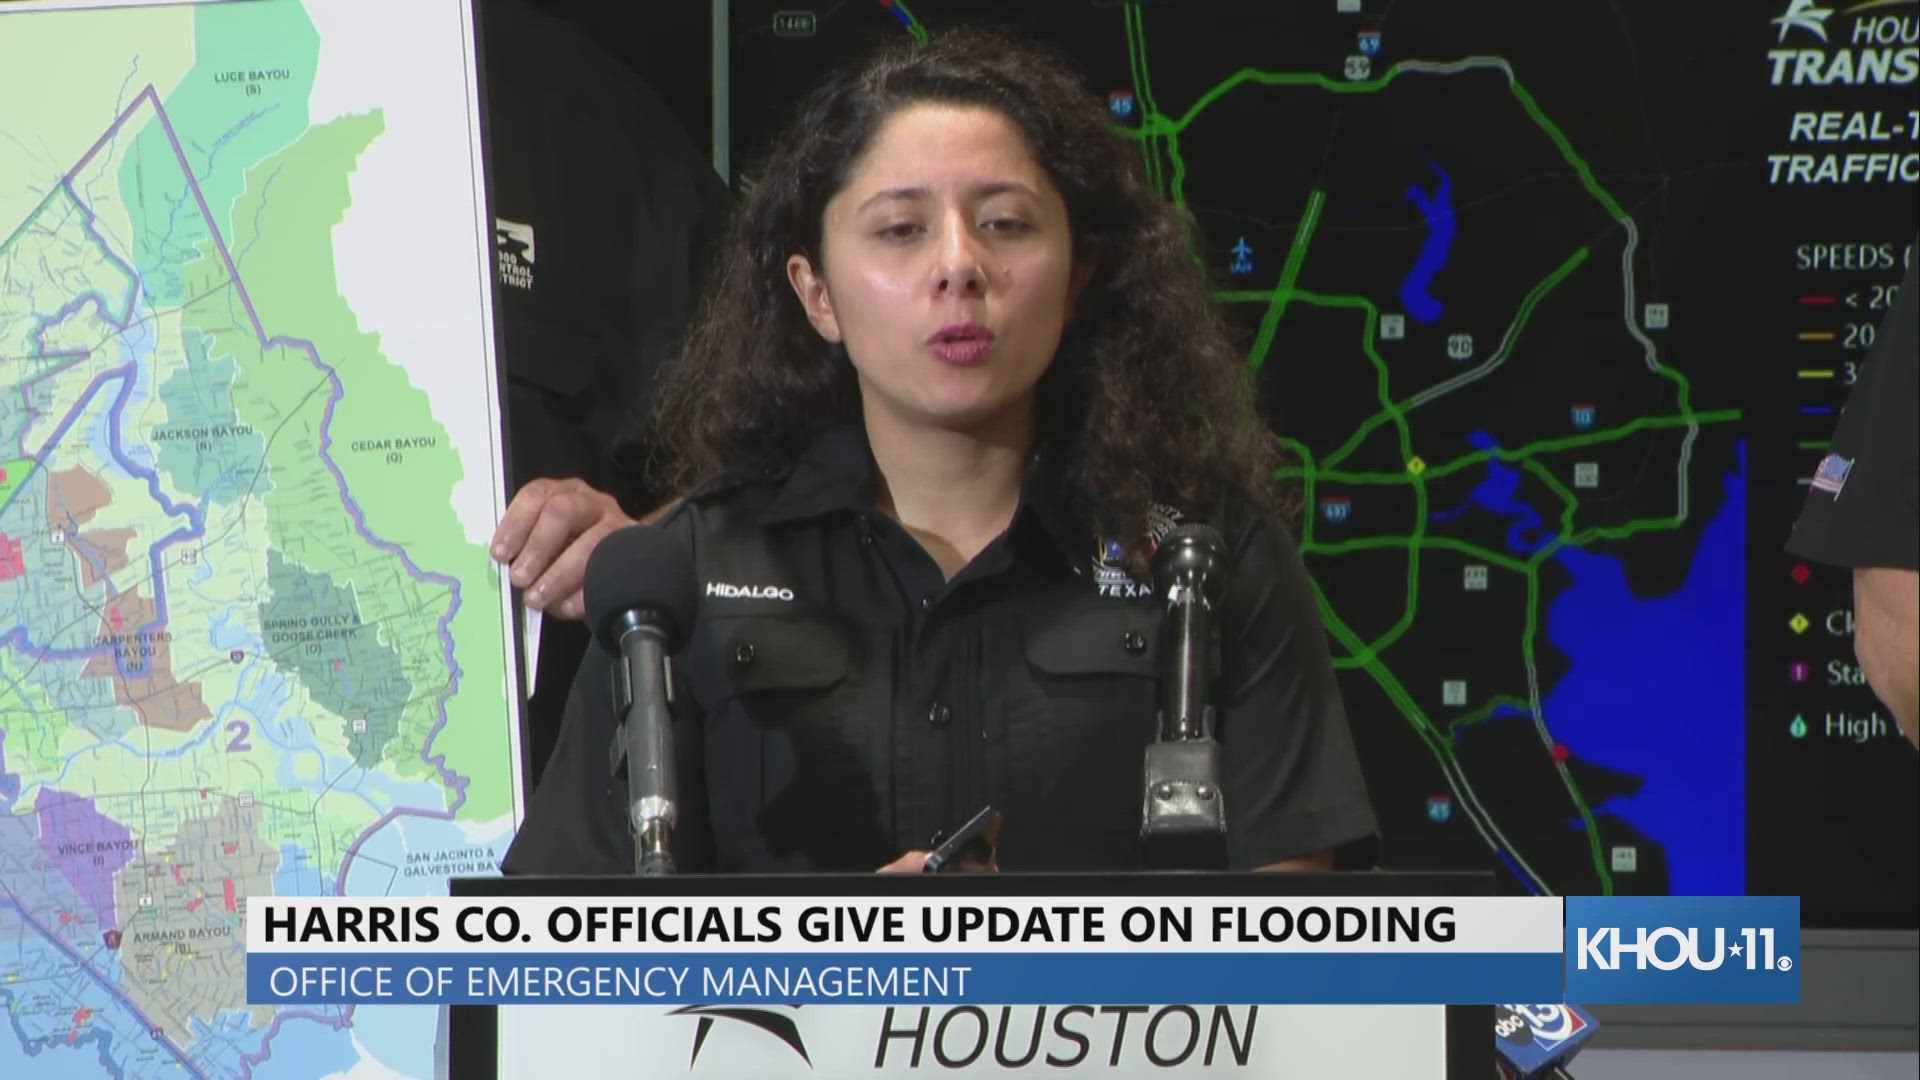 Harris County Judge Lina Hidalgo called for a voluntary evacuation Tuesday night for people along the San Jacinto River.